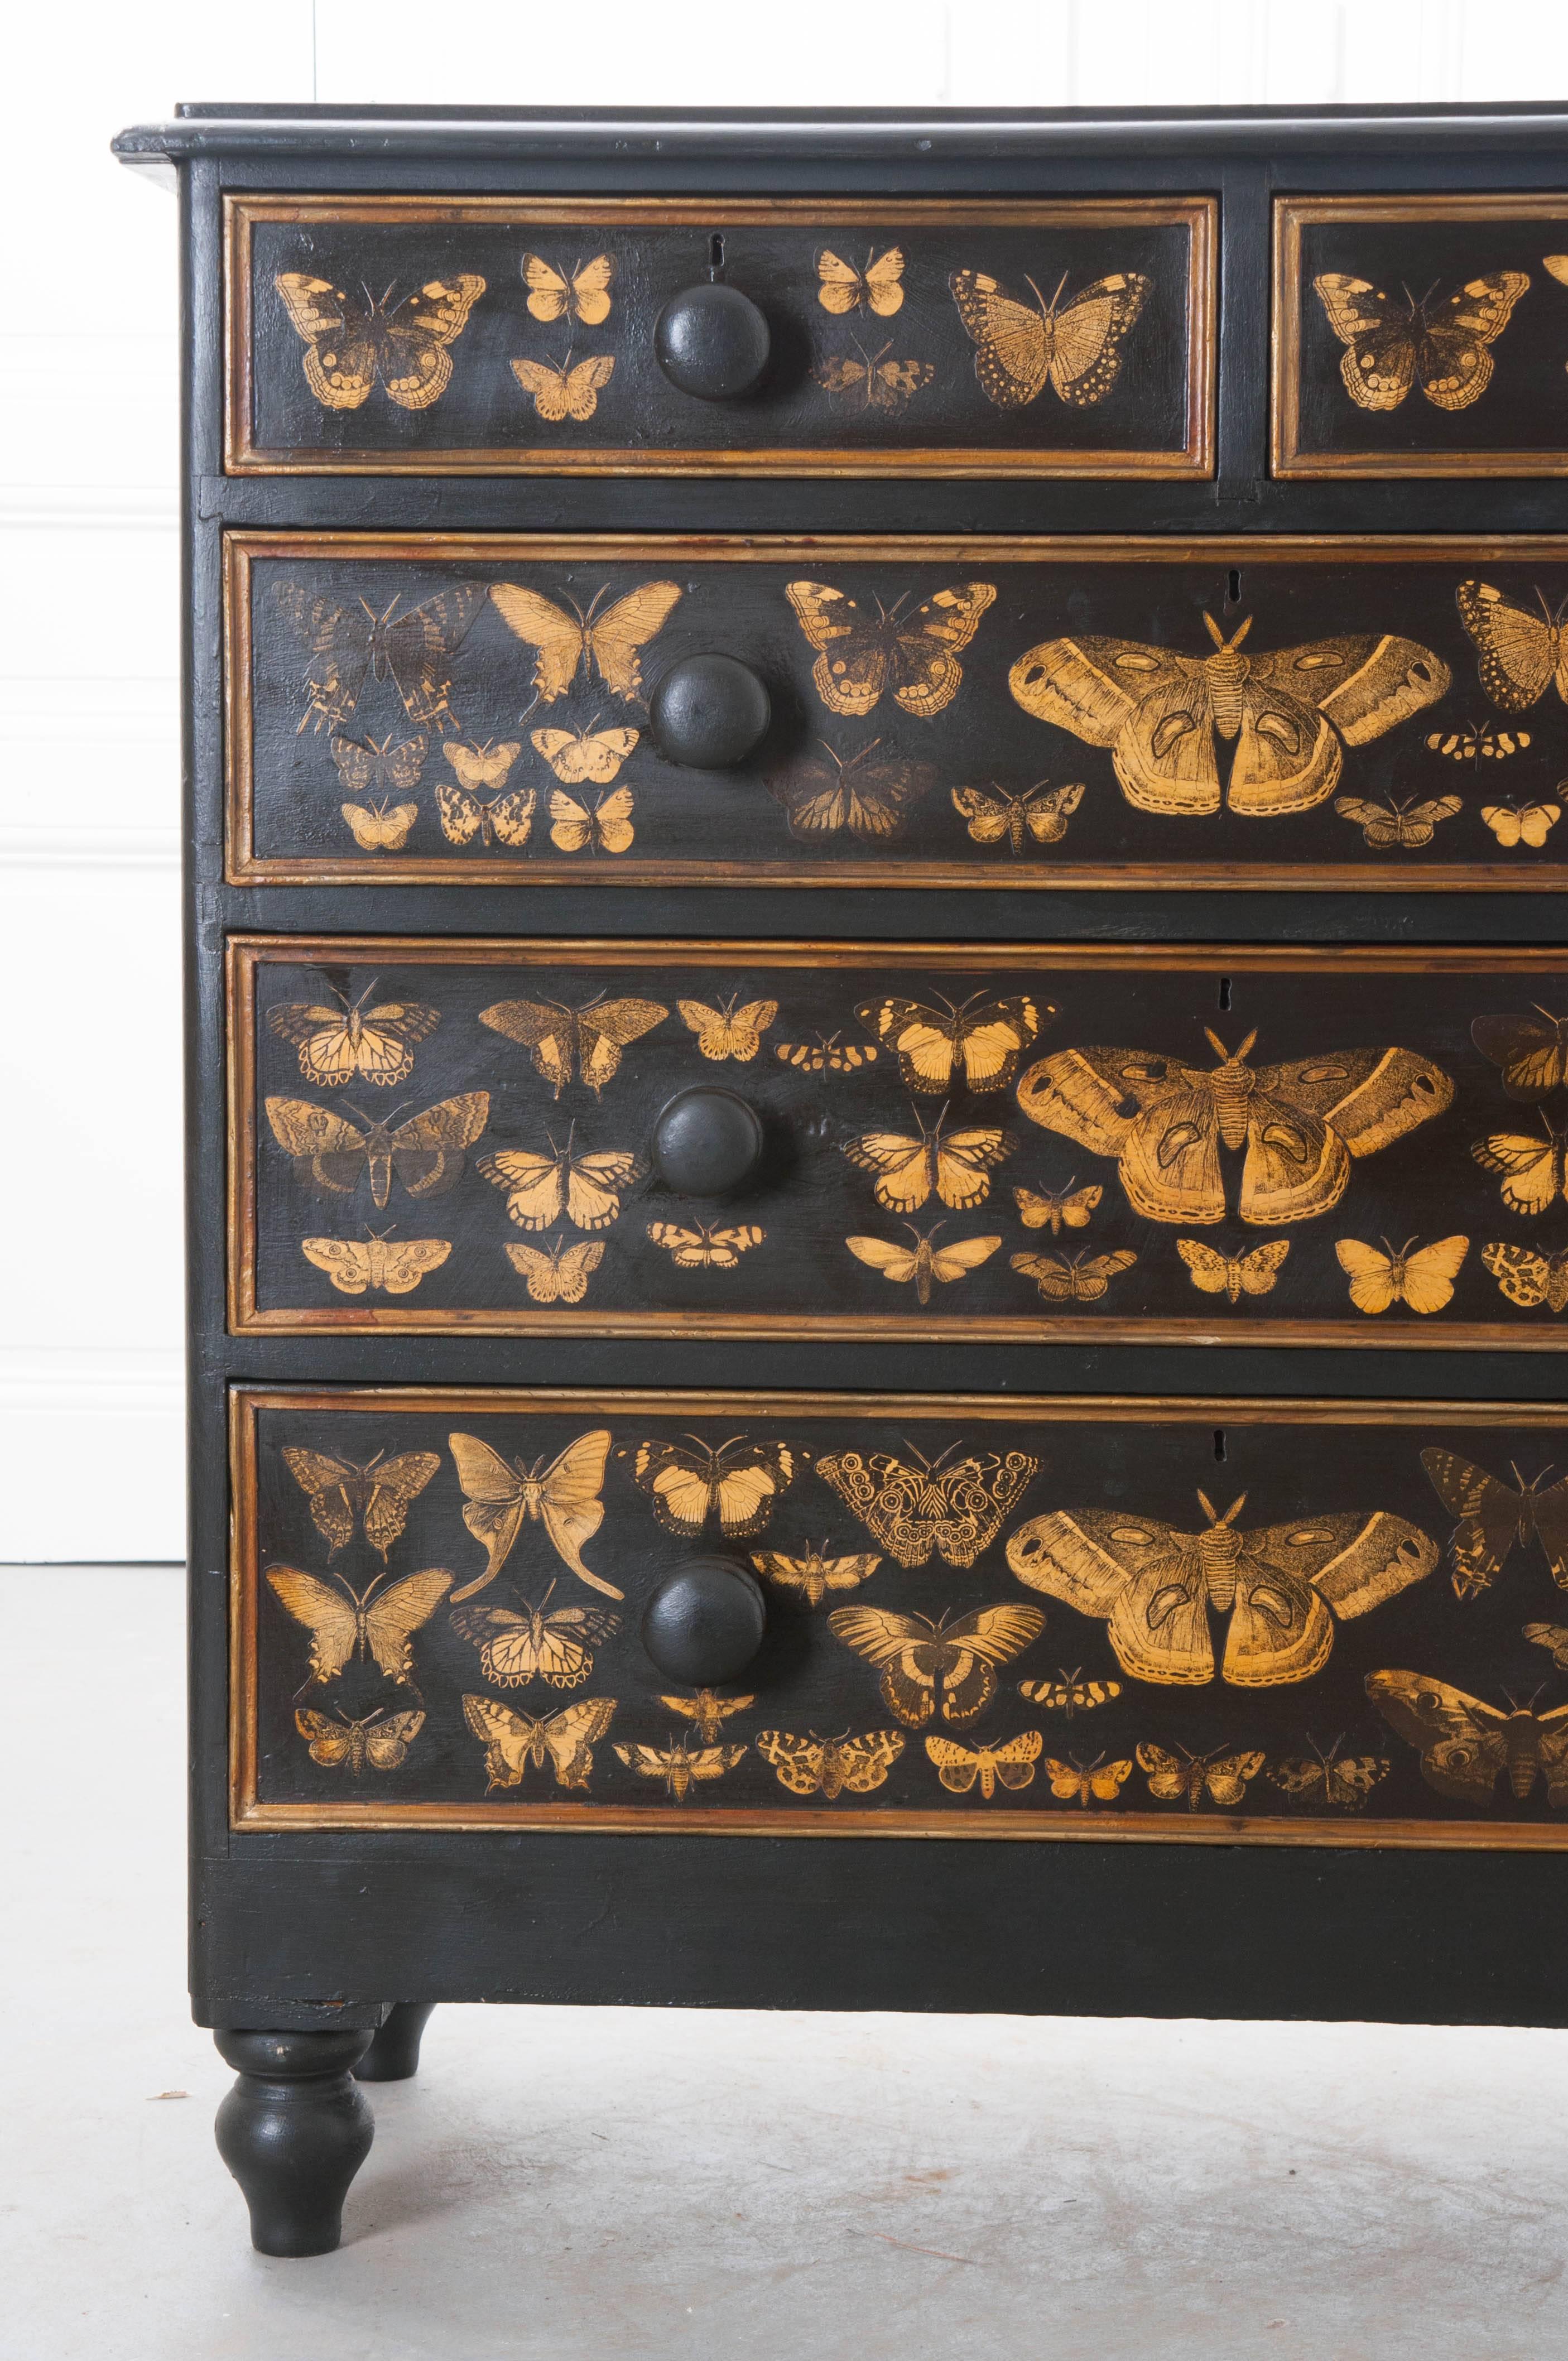 A spectacular five drawer Victorian painted chest of drawers from 19th century England, that has more recently had beautiful gold moths decoupaged onto the piece. The chest has two smaller top drawers with three larger drawers beneath that are